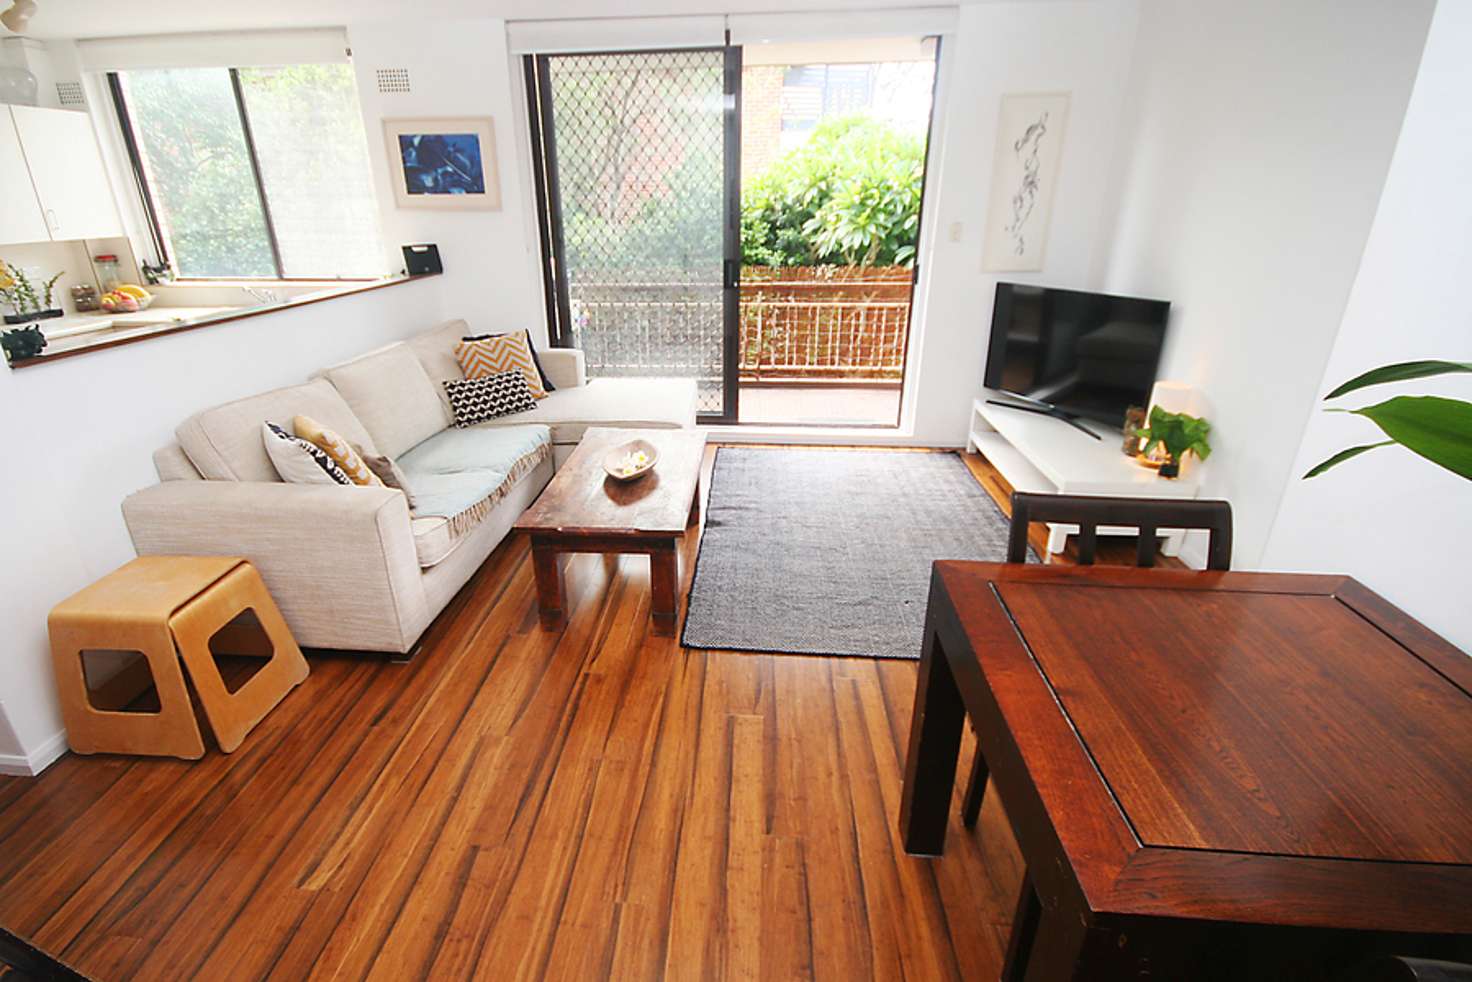 Main view of Homely apartment listing, 7/62 Gordon Street, Manly Vale NSW 2093